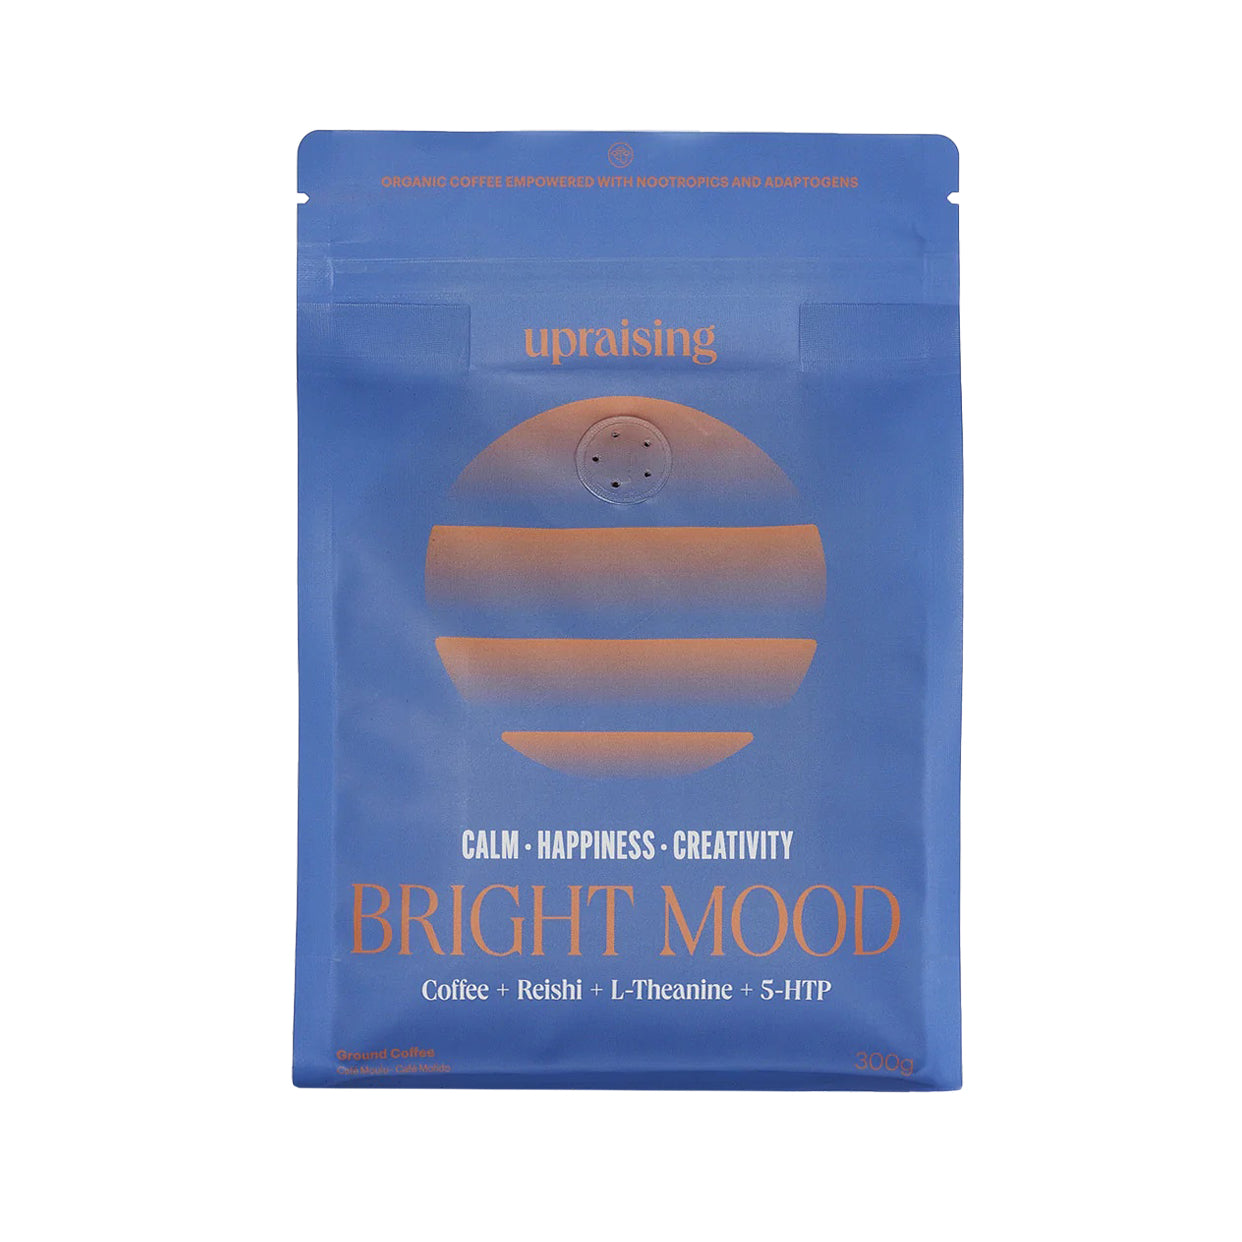 Upraising Bright Mood Coffee with Reishi, L-Theanine and 5-HTP